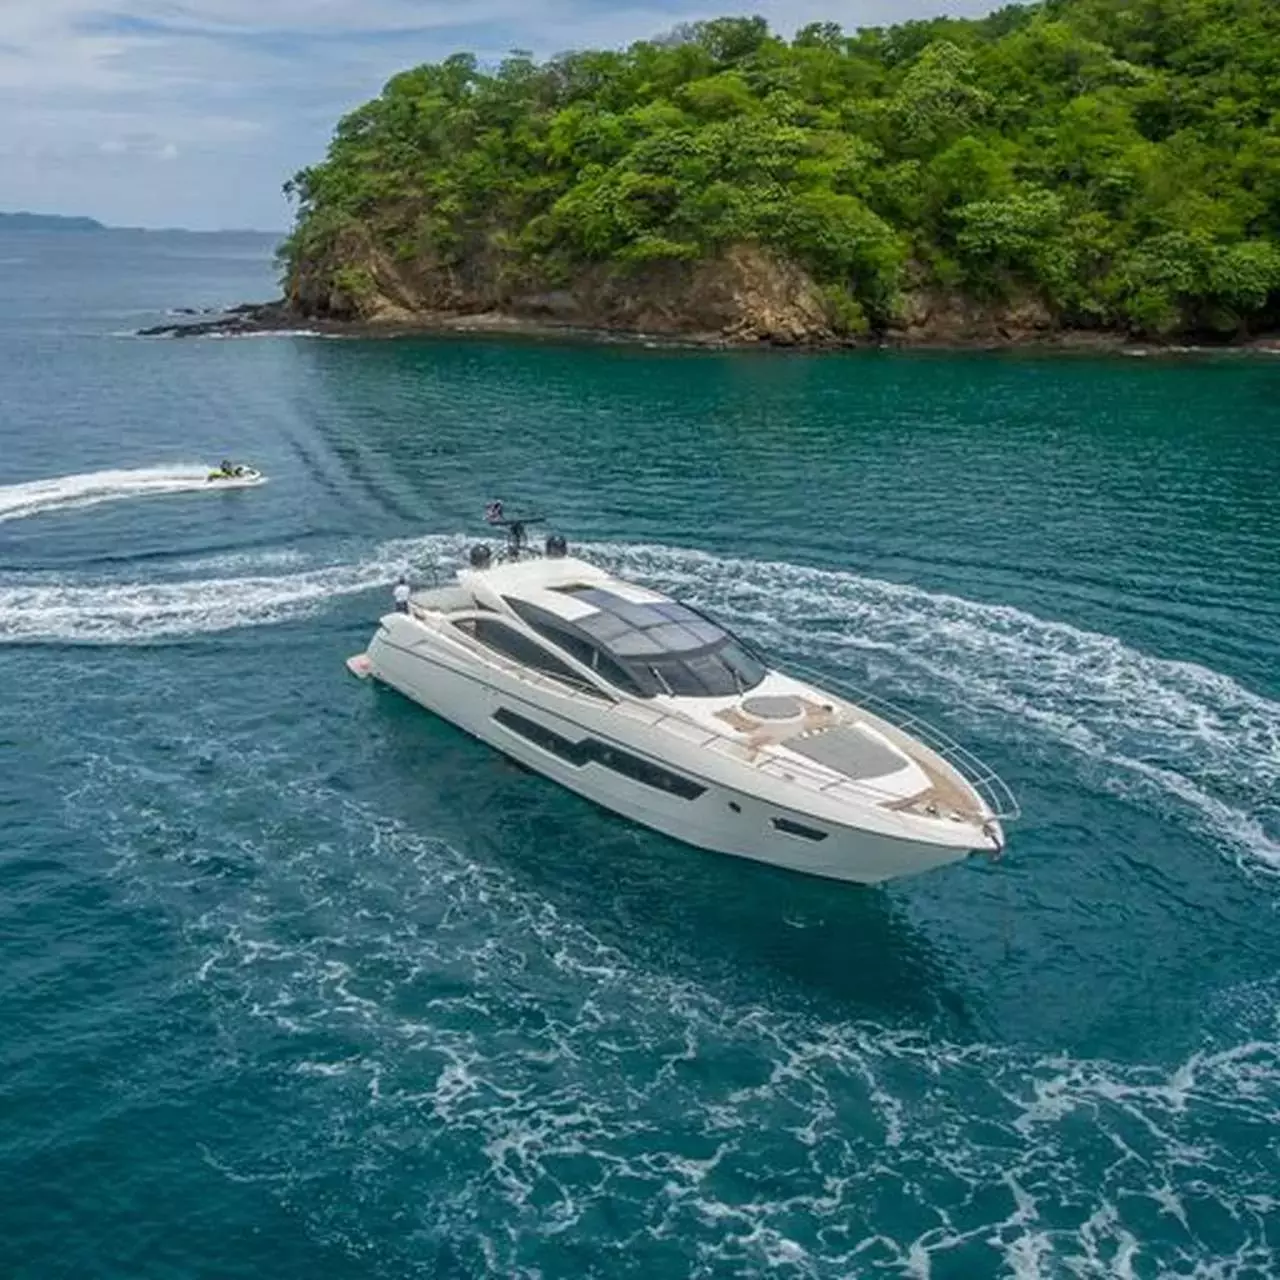 Costasol by Sunseeker - Top rates for a Charter of a private Motor Yacht in Costa Rica